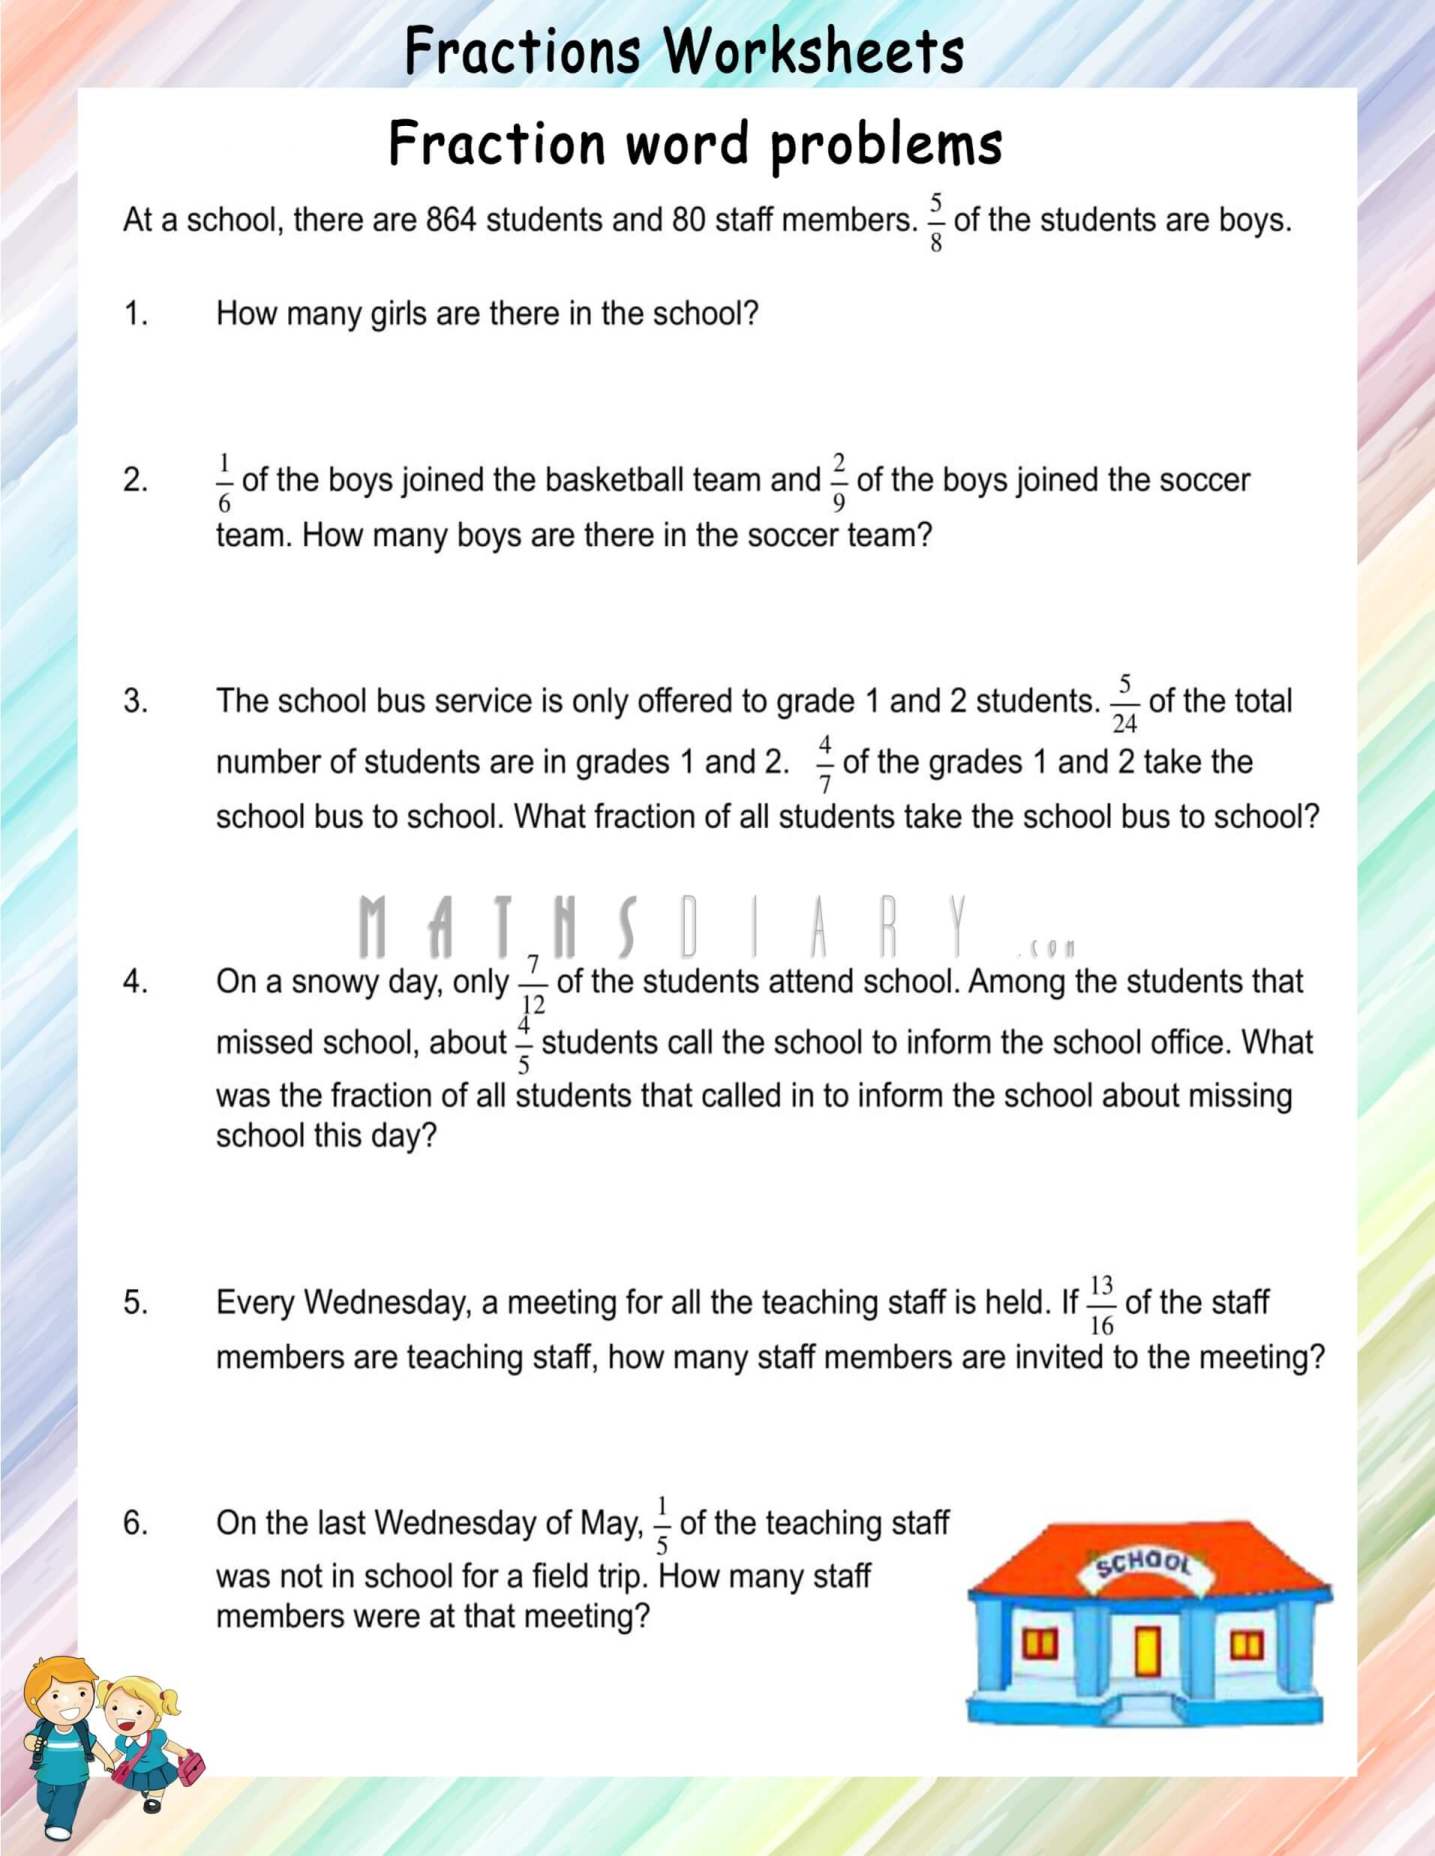 multiplication-of-fractions-in-word-problems-math-worksheets